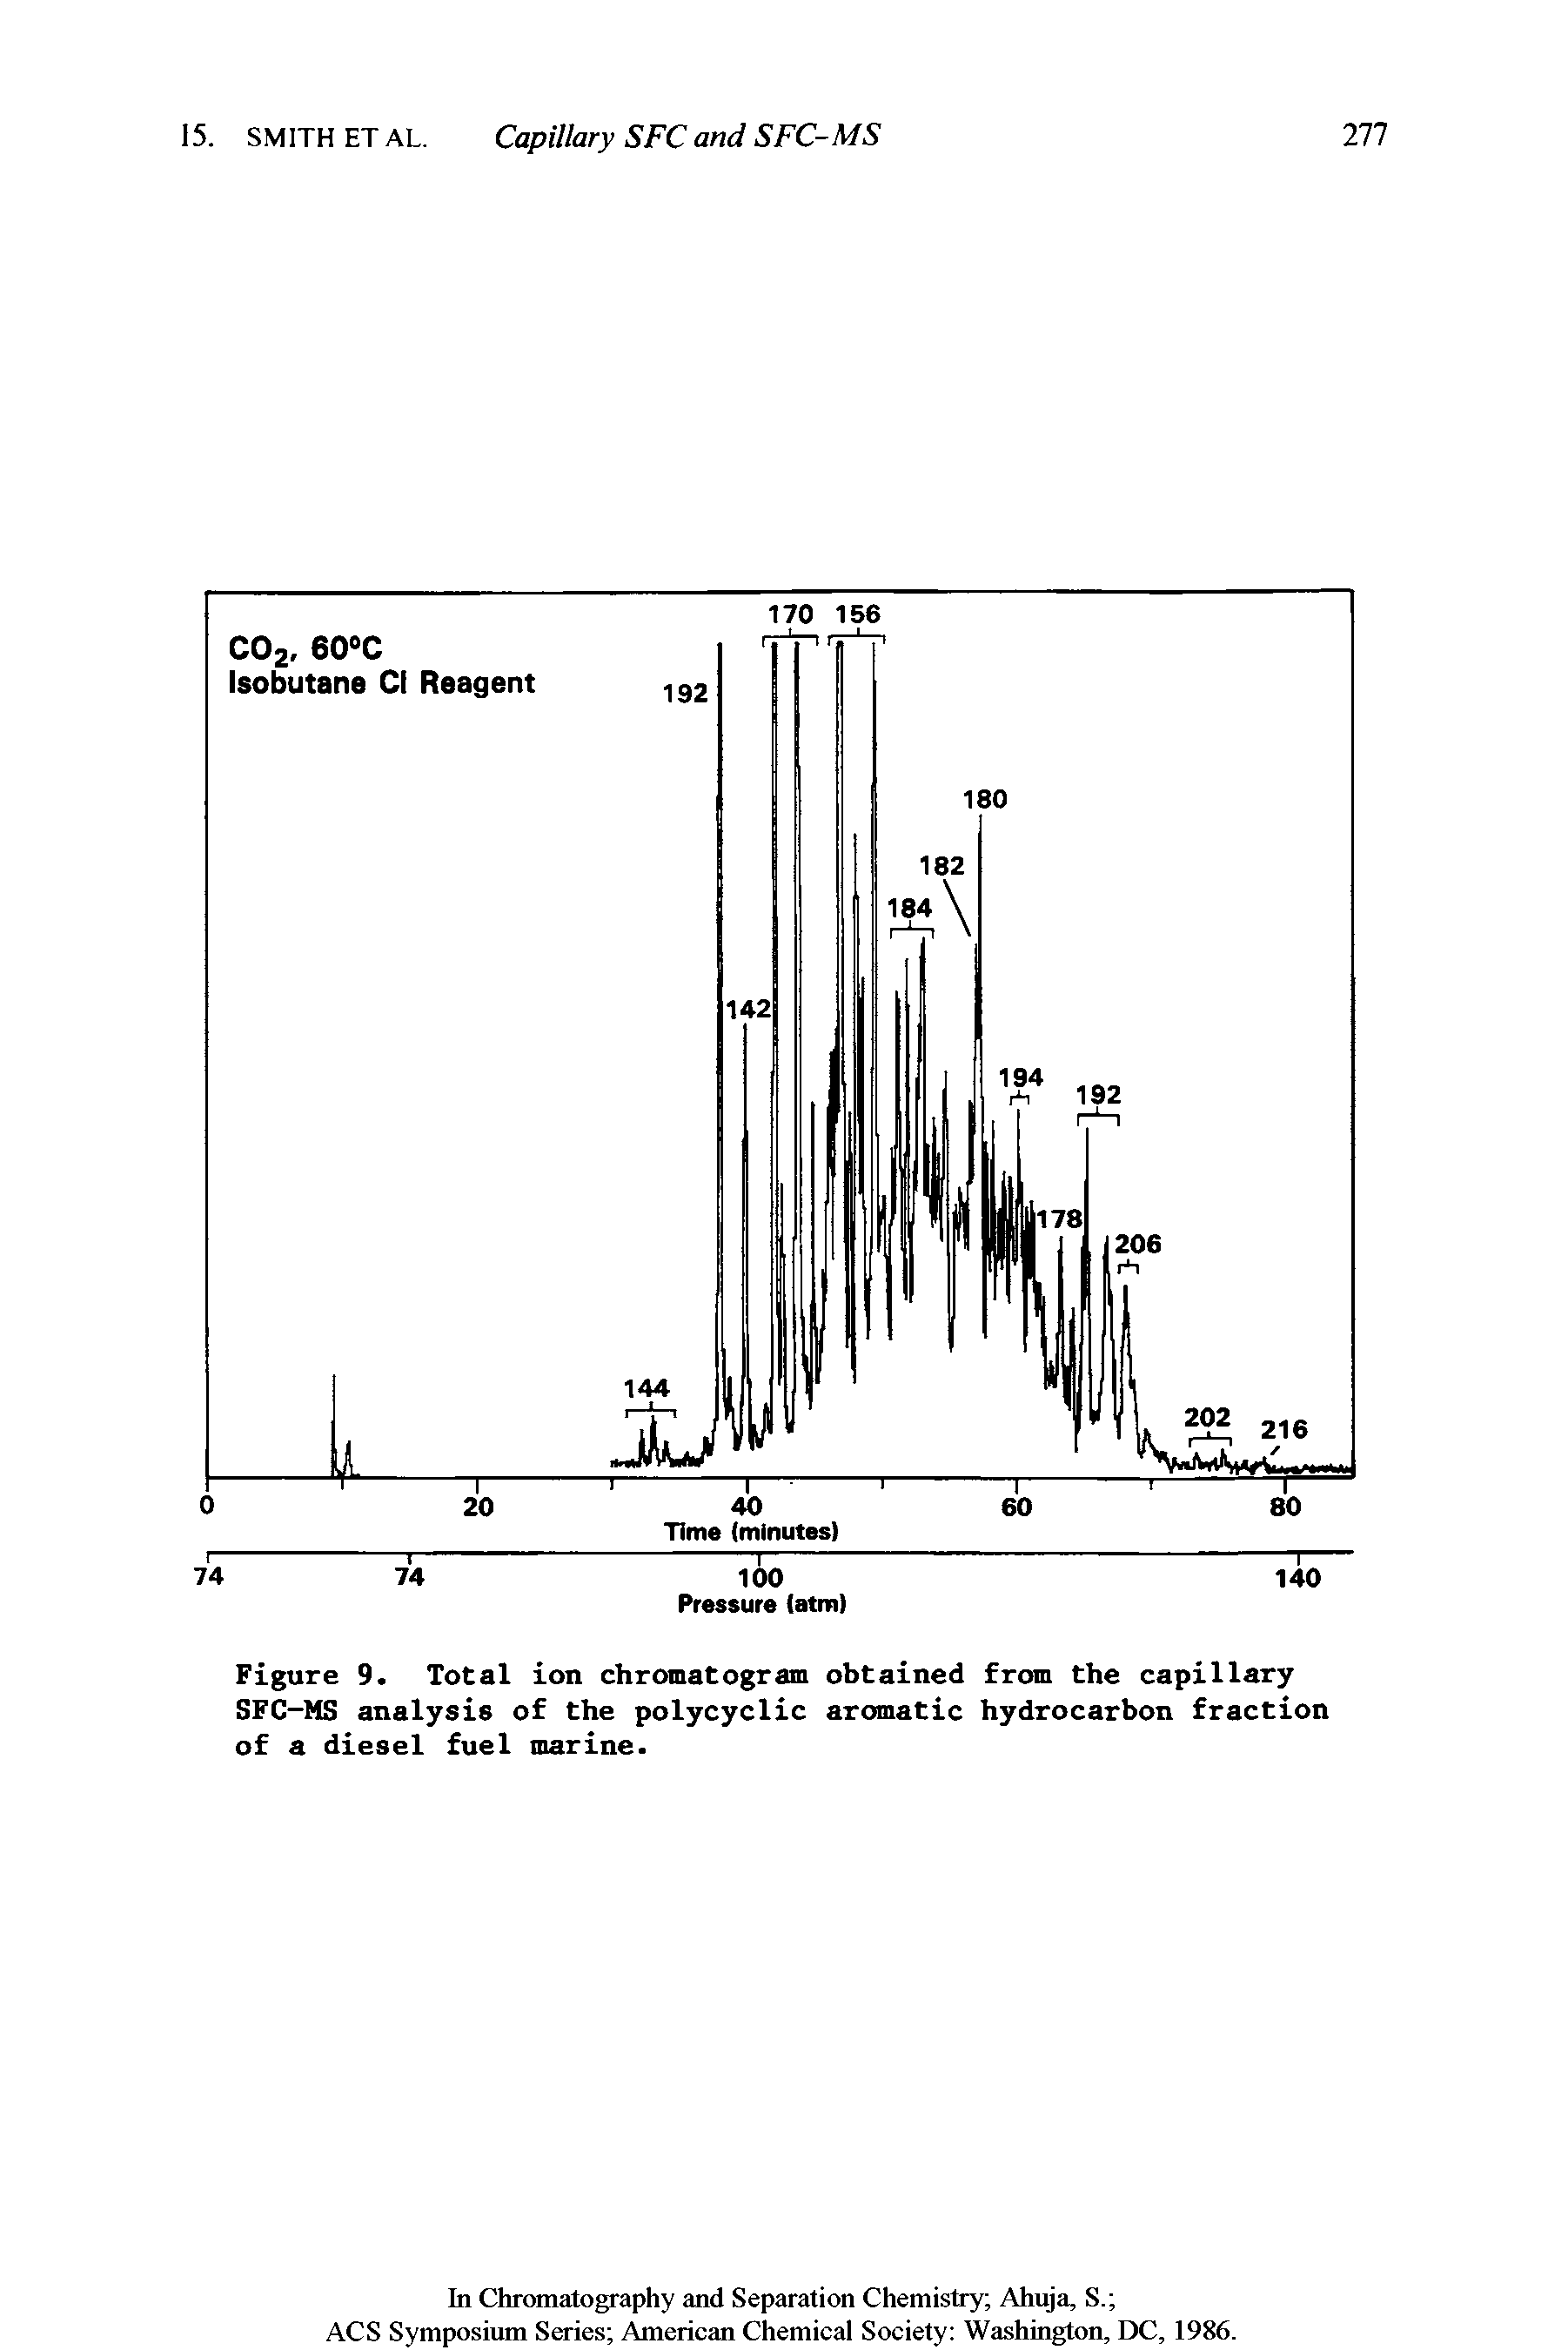 Figure 9. Total ion chromatogram obtained from the capillary SFC-MS analysis of the polycyclic aromatic hydrocarbon fraction of a diesel fuel marine.